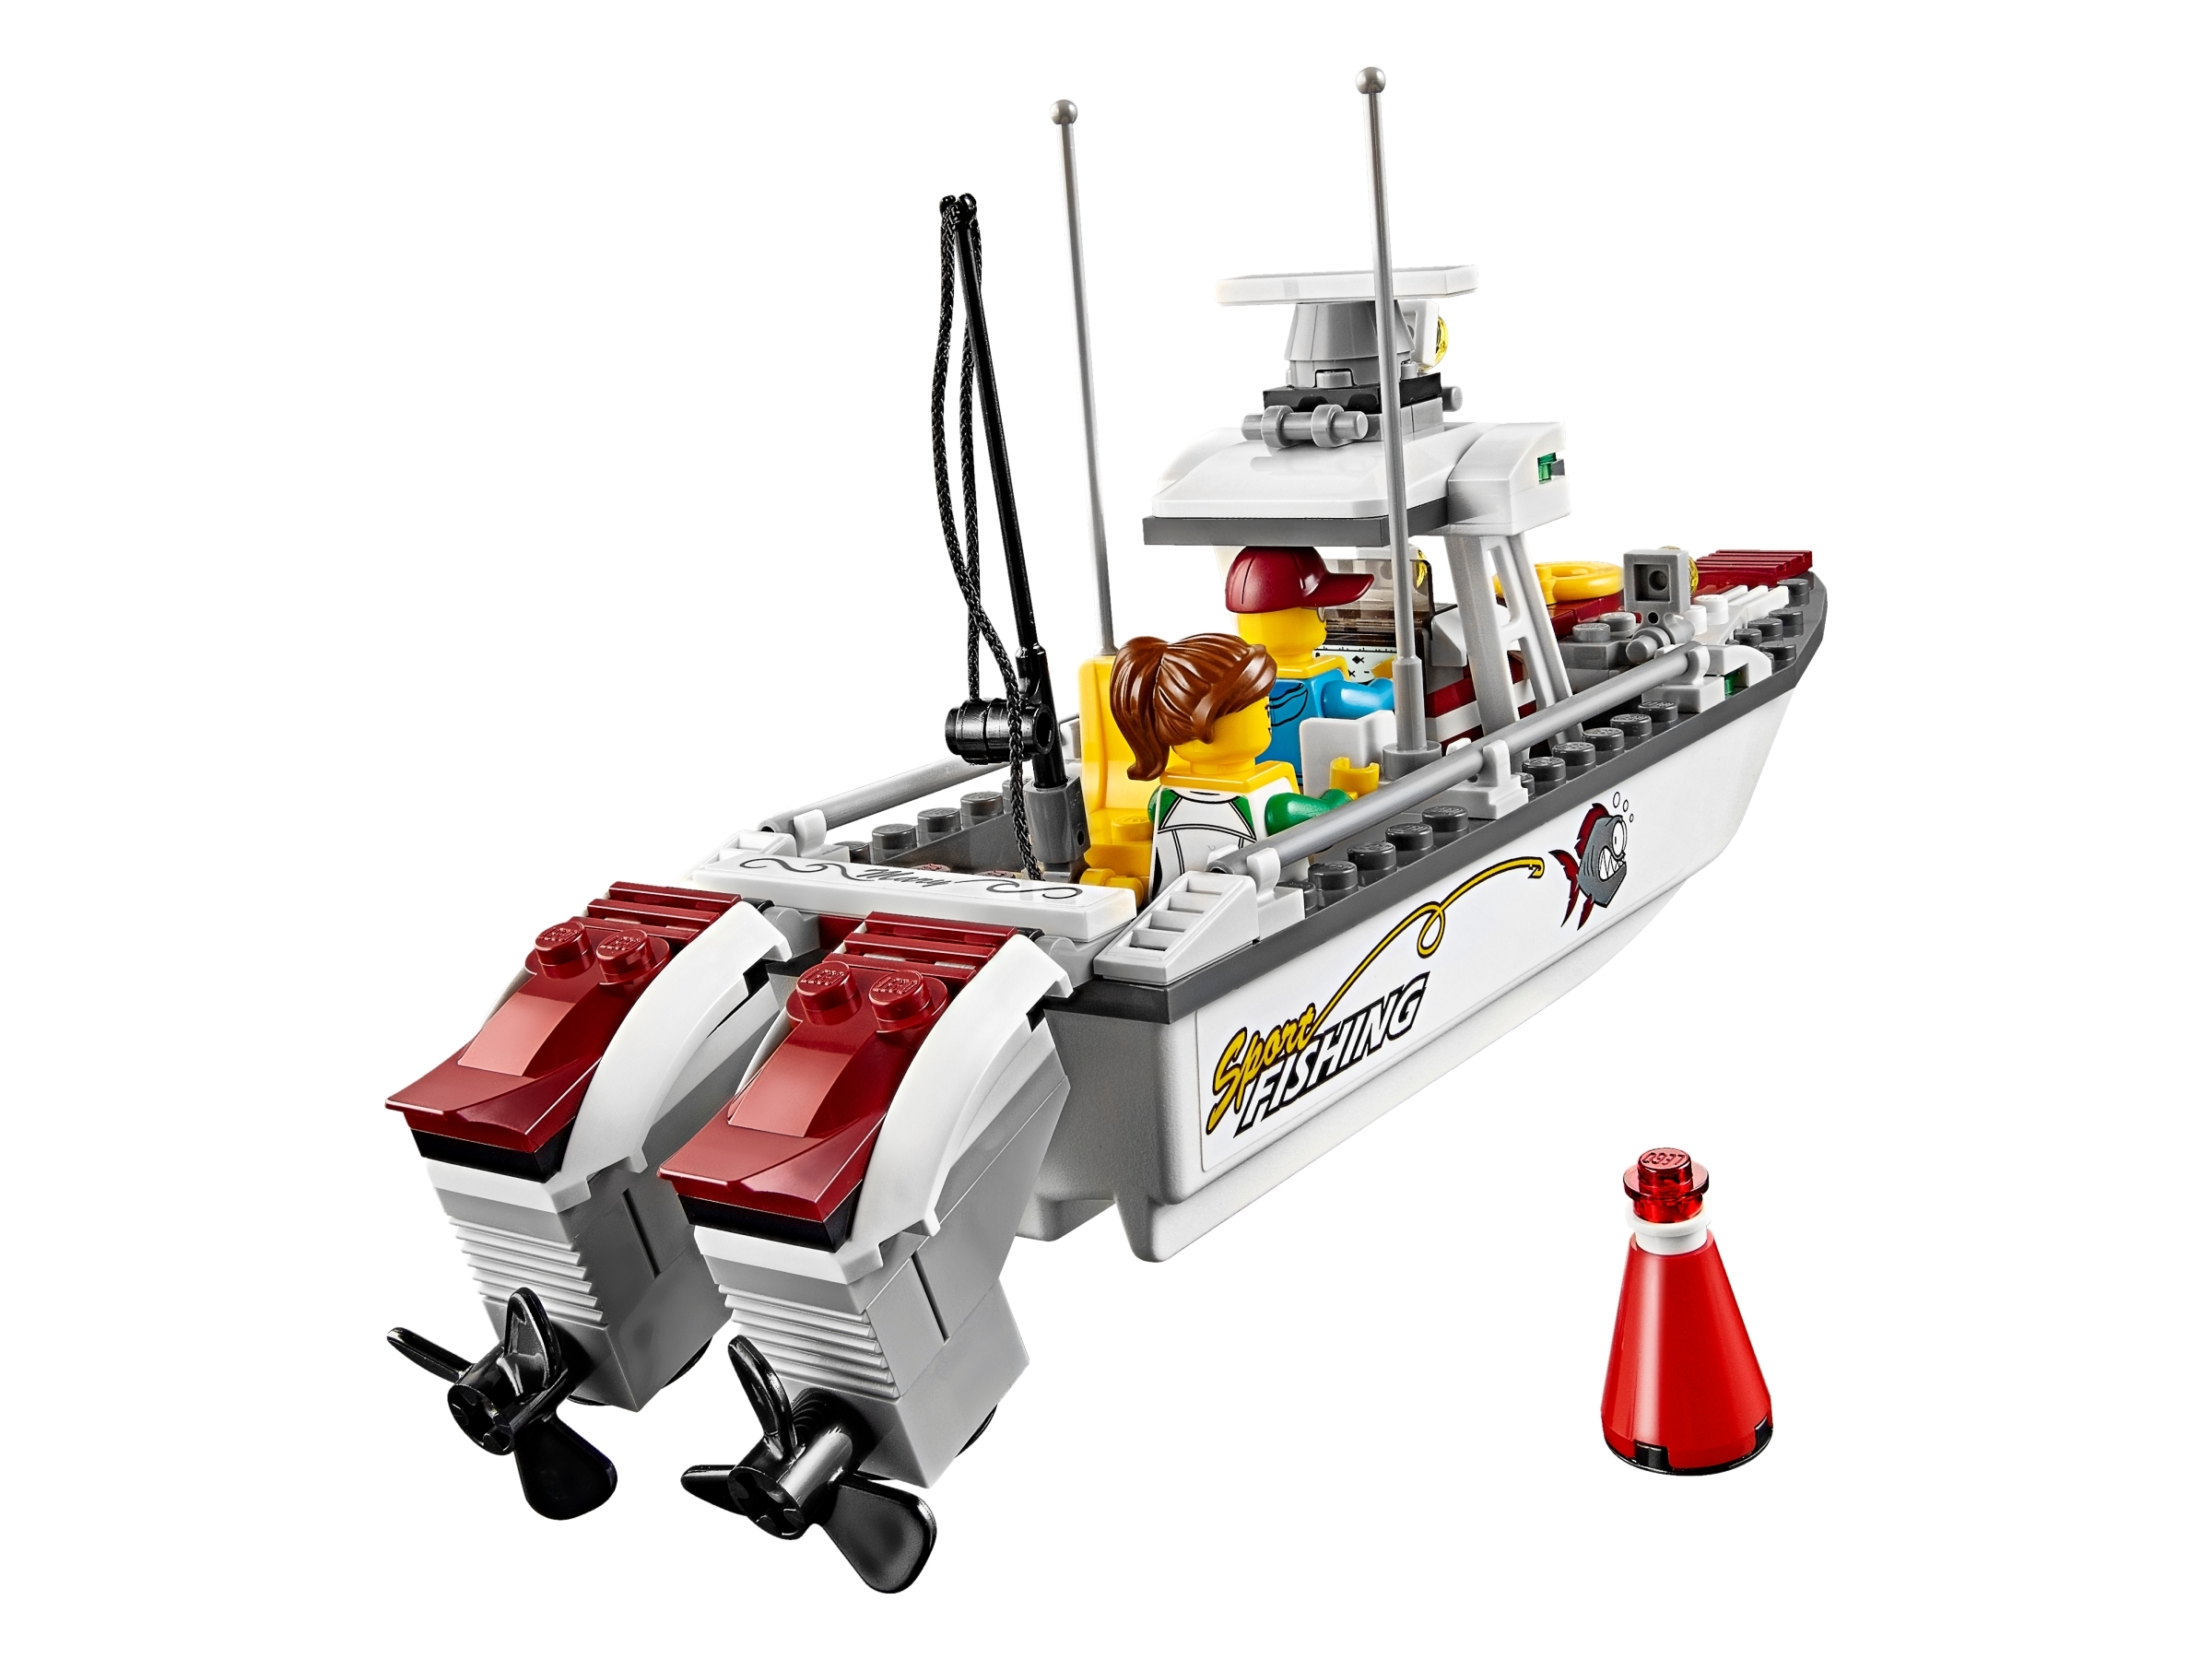 60147 | City | Buy at the Official LEGO® Shop